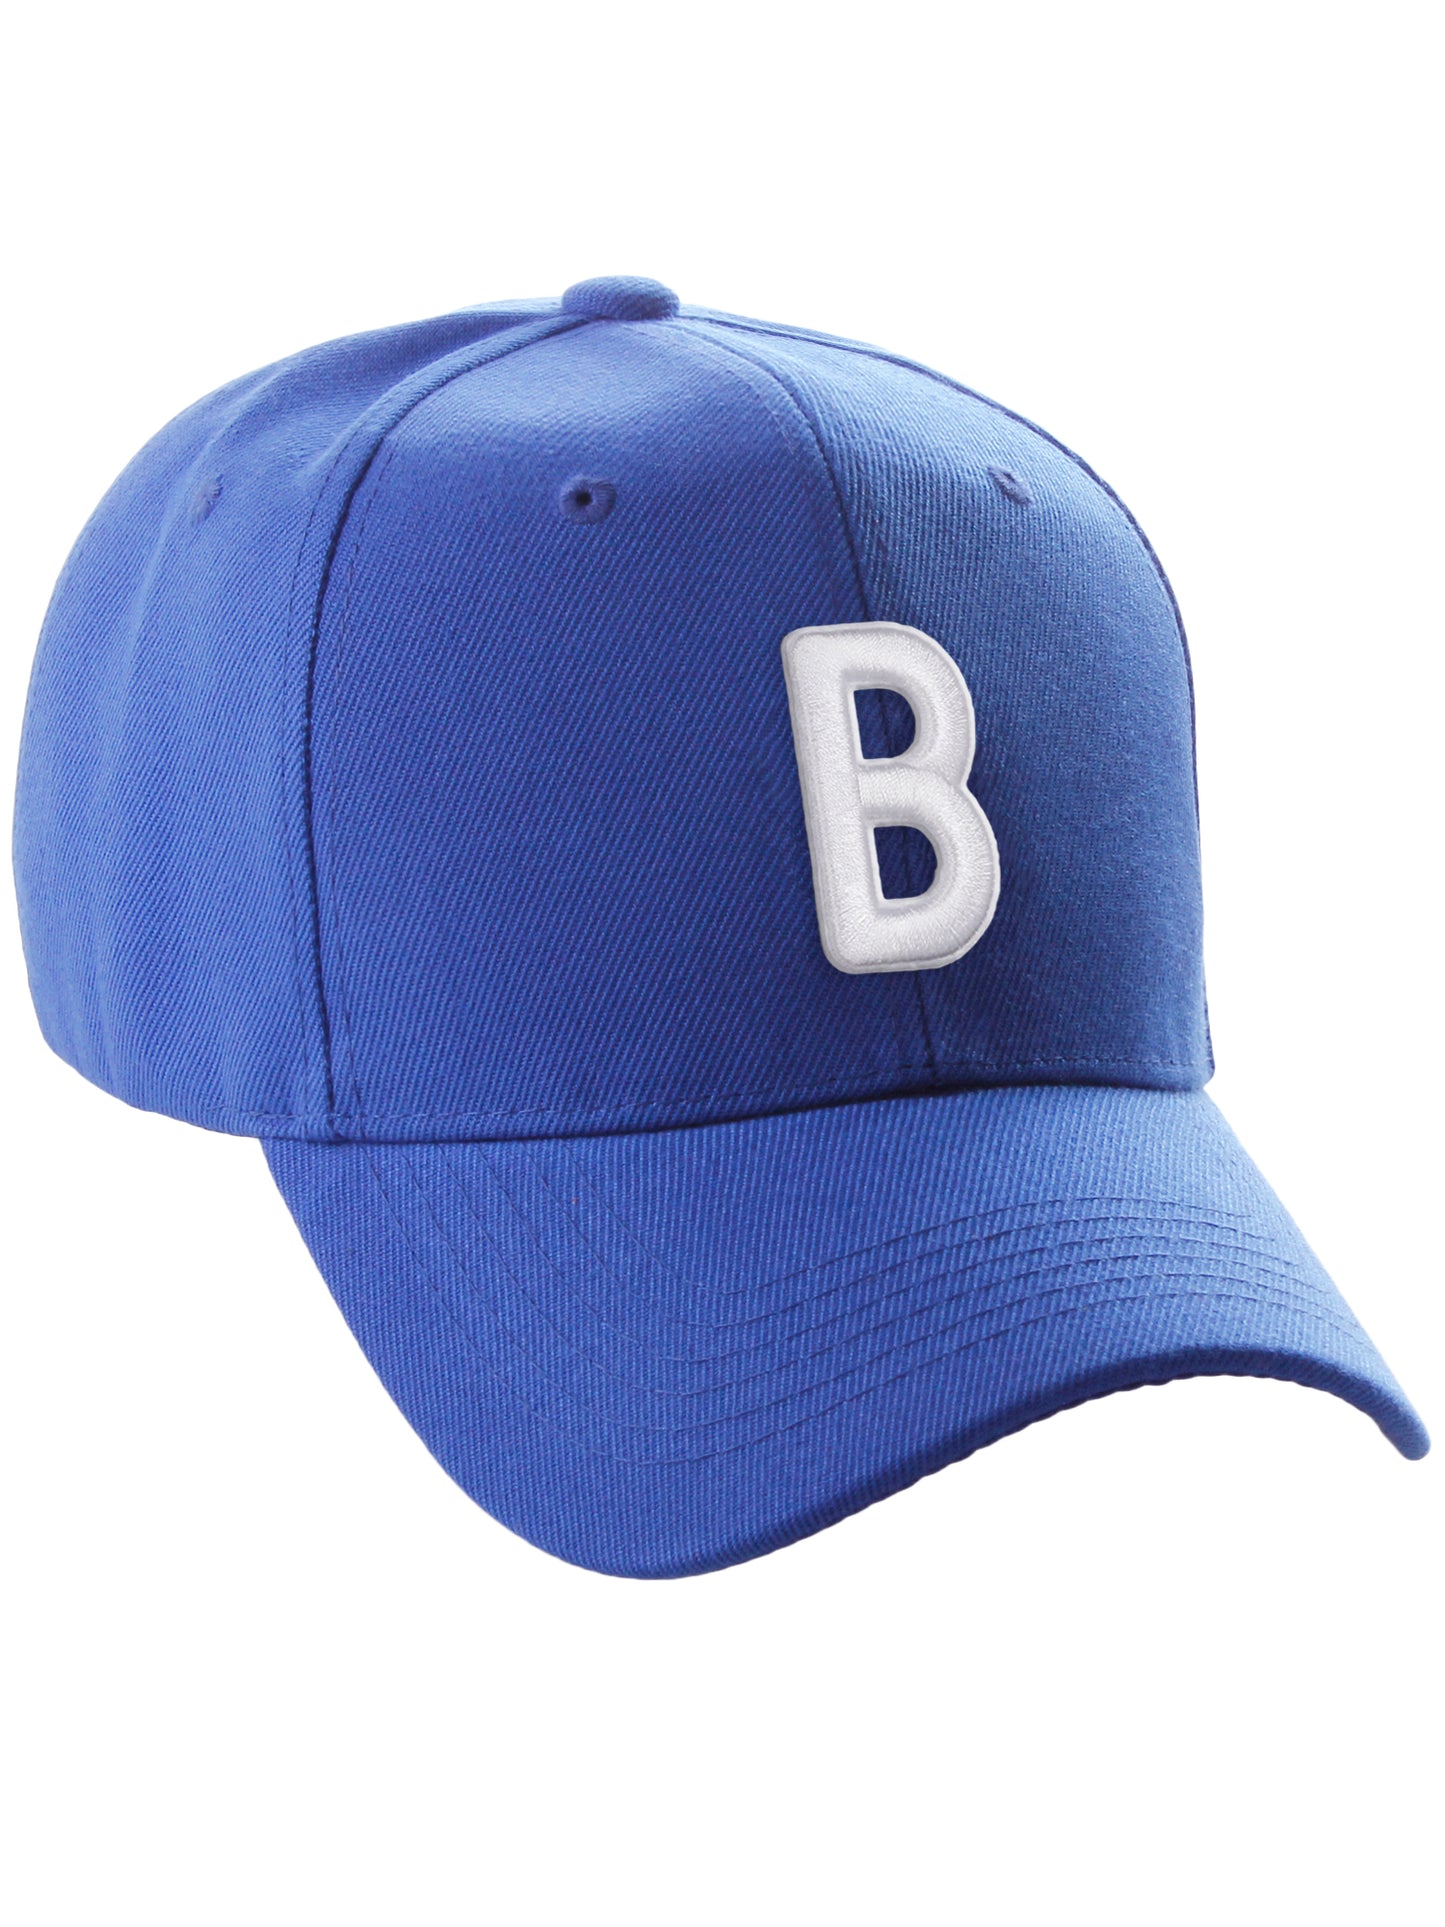 Daxton Classic Baseball Hat Embroidered A to Z Letters Structured Mid Profile Cap